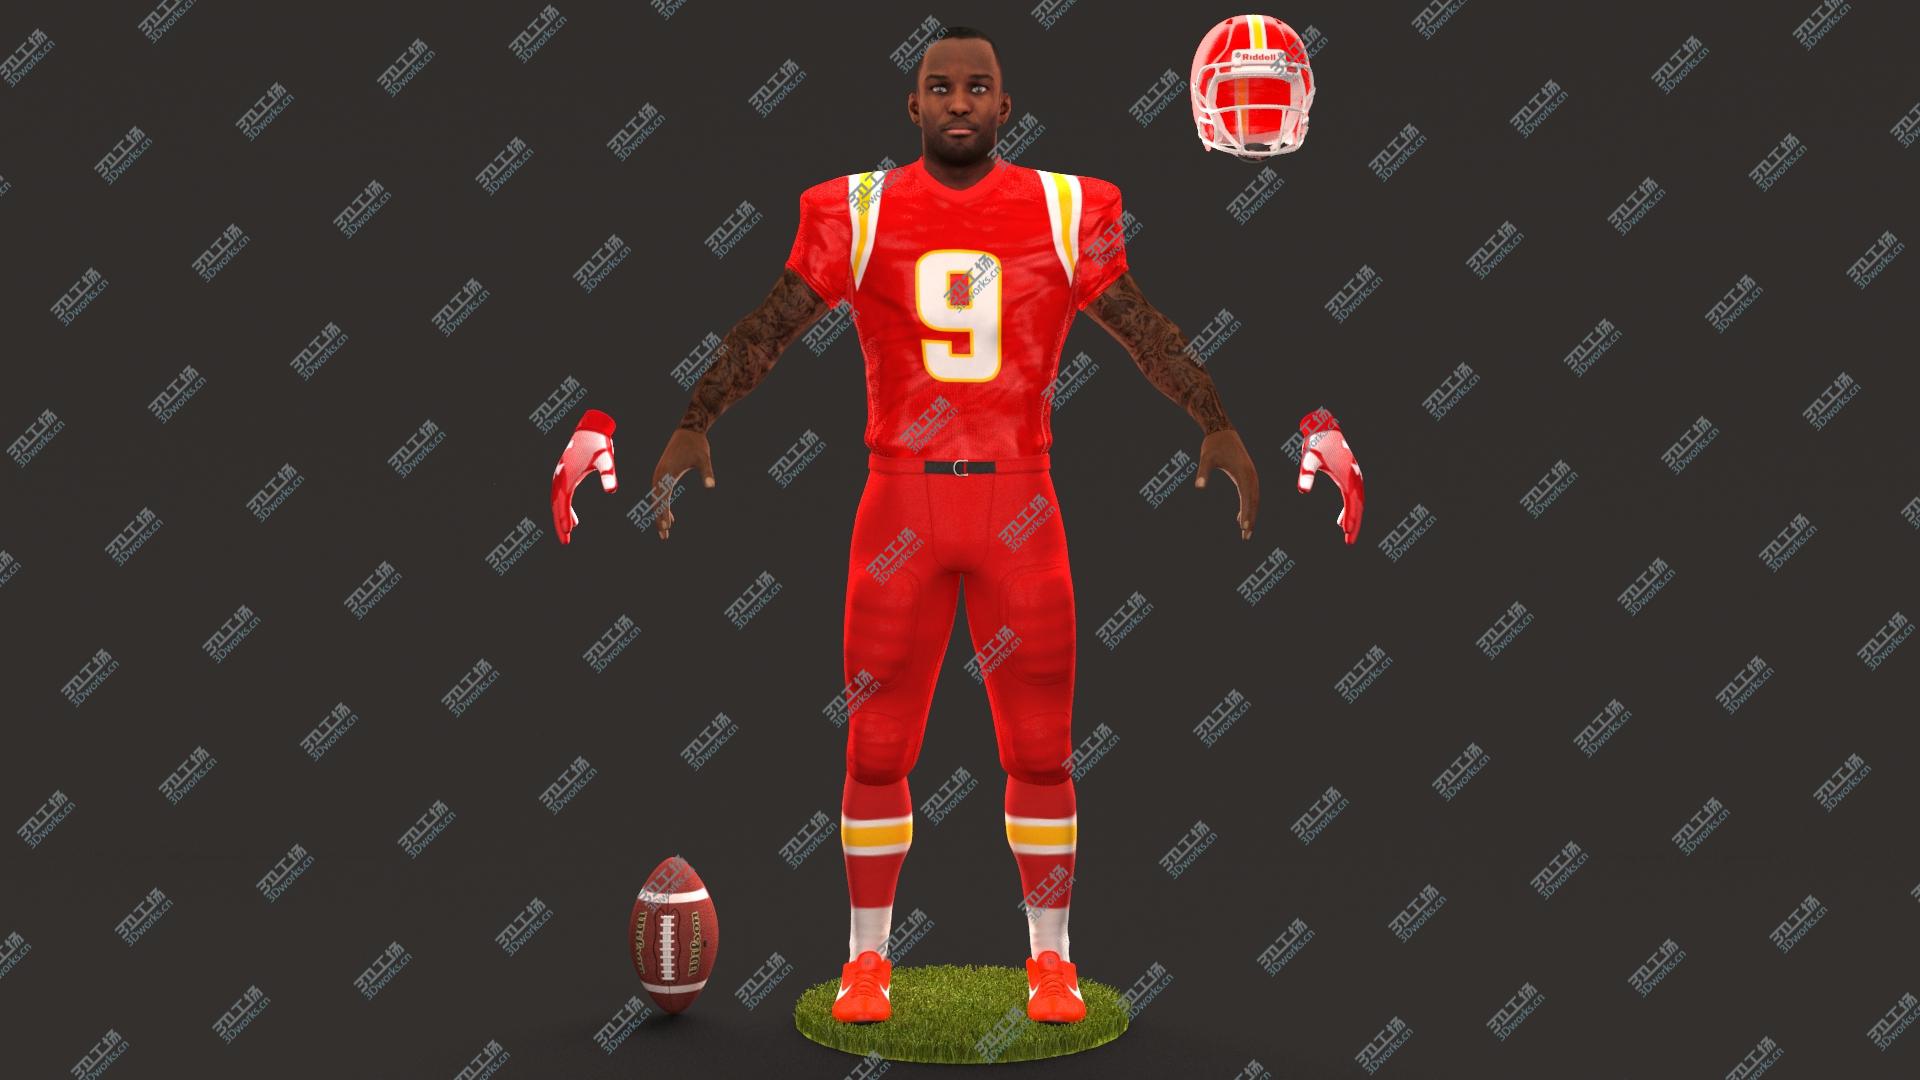 images/goods_img/20210313/American Football Players 2020 PBR Pack model/4.jpg